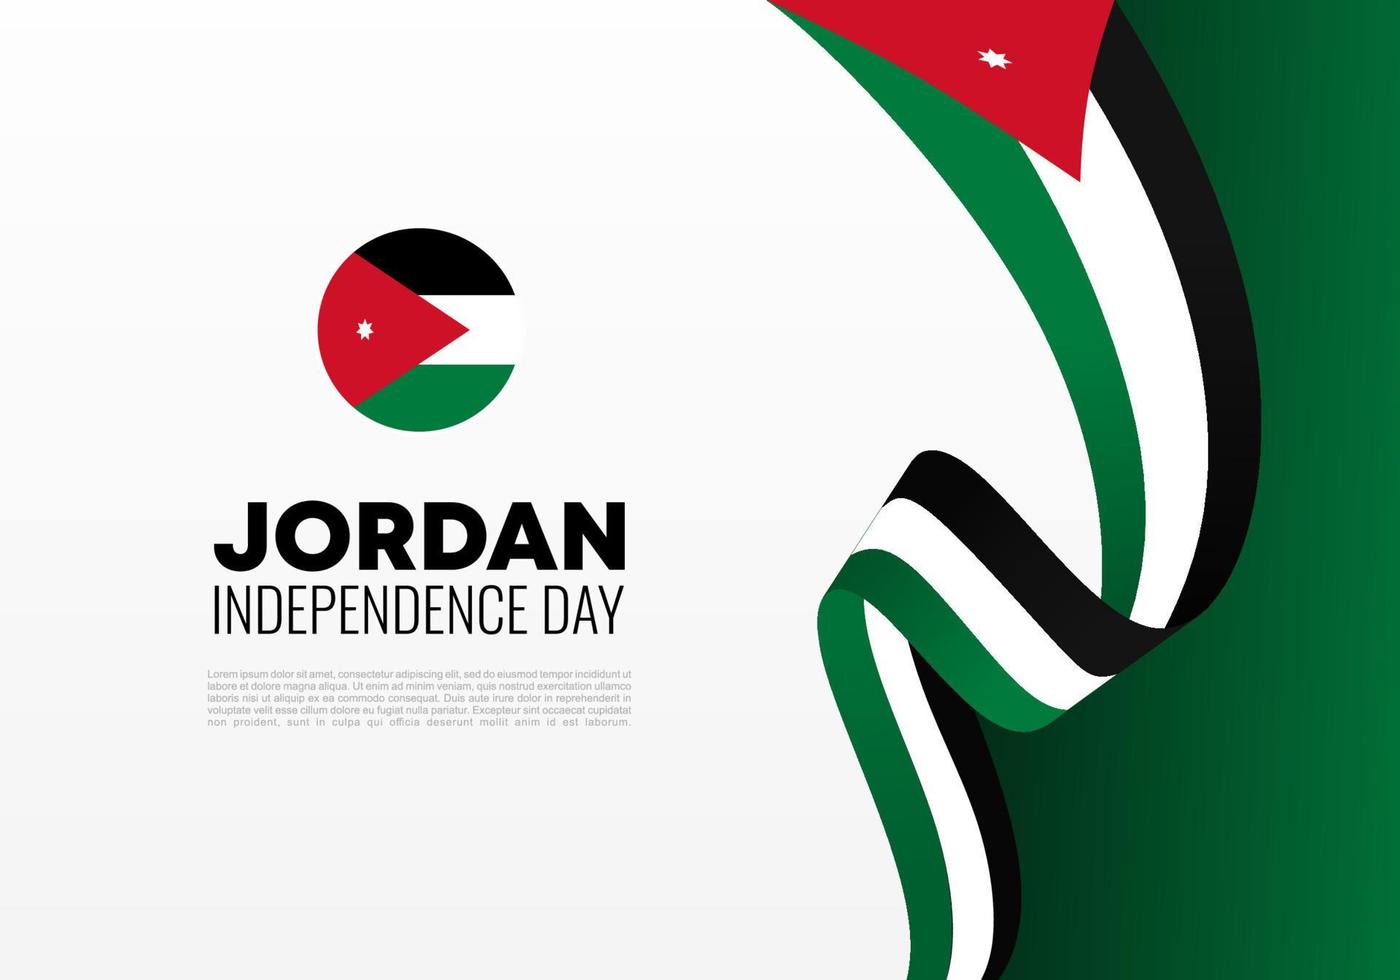 Jordan independence day for national celebration on may 25. vector